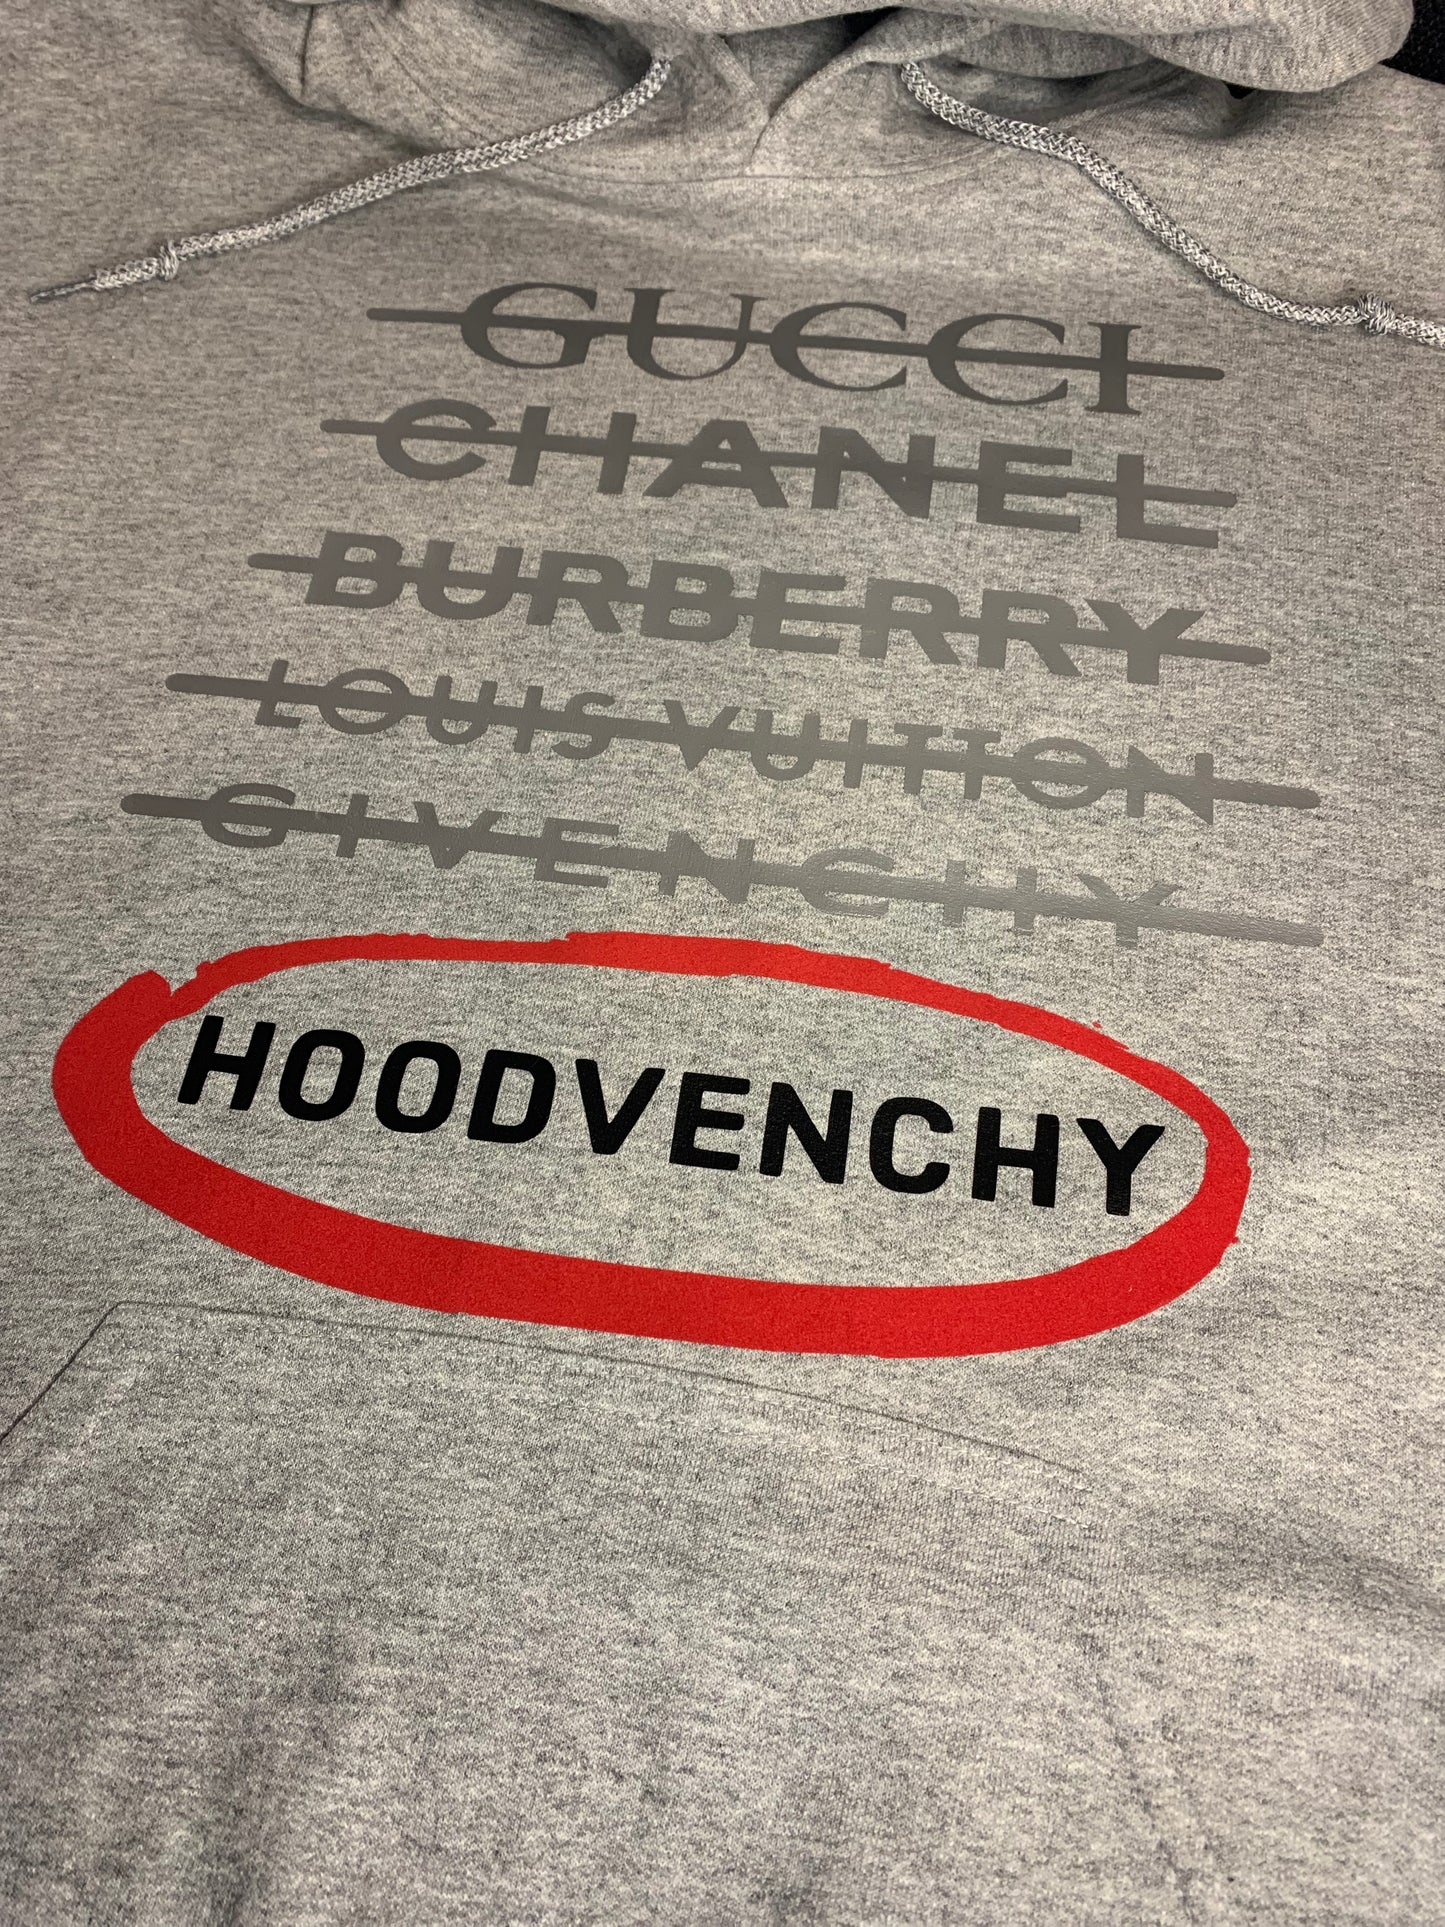 SORRY BUT I’M WITH HOODVENCHY !!